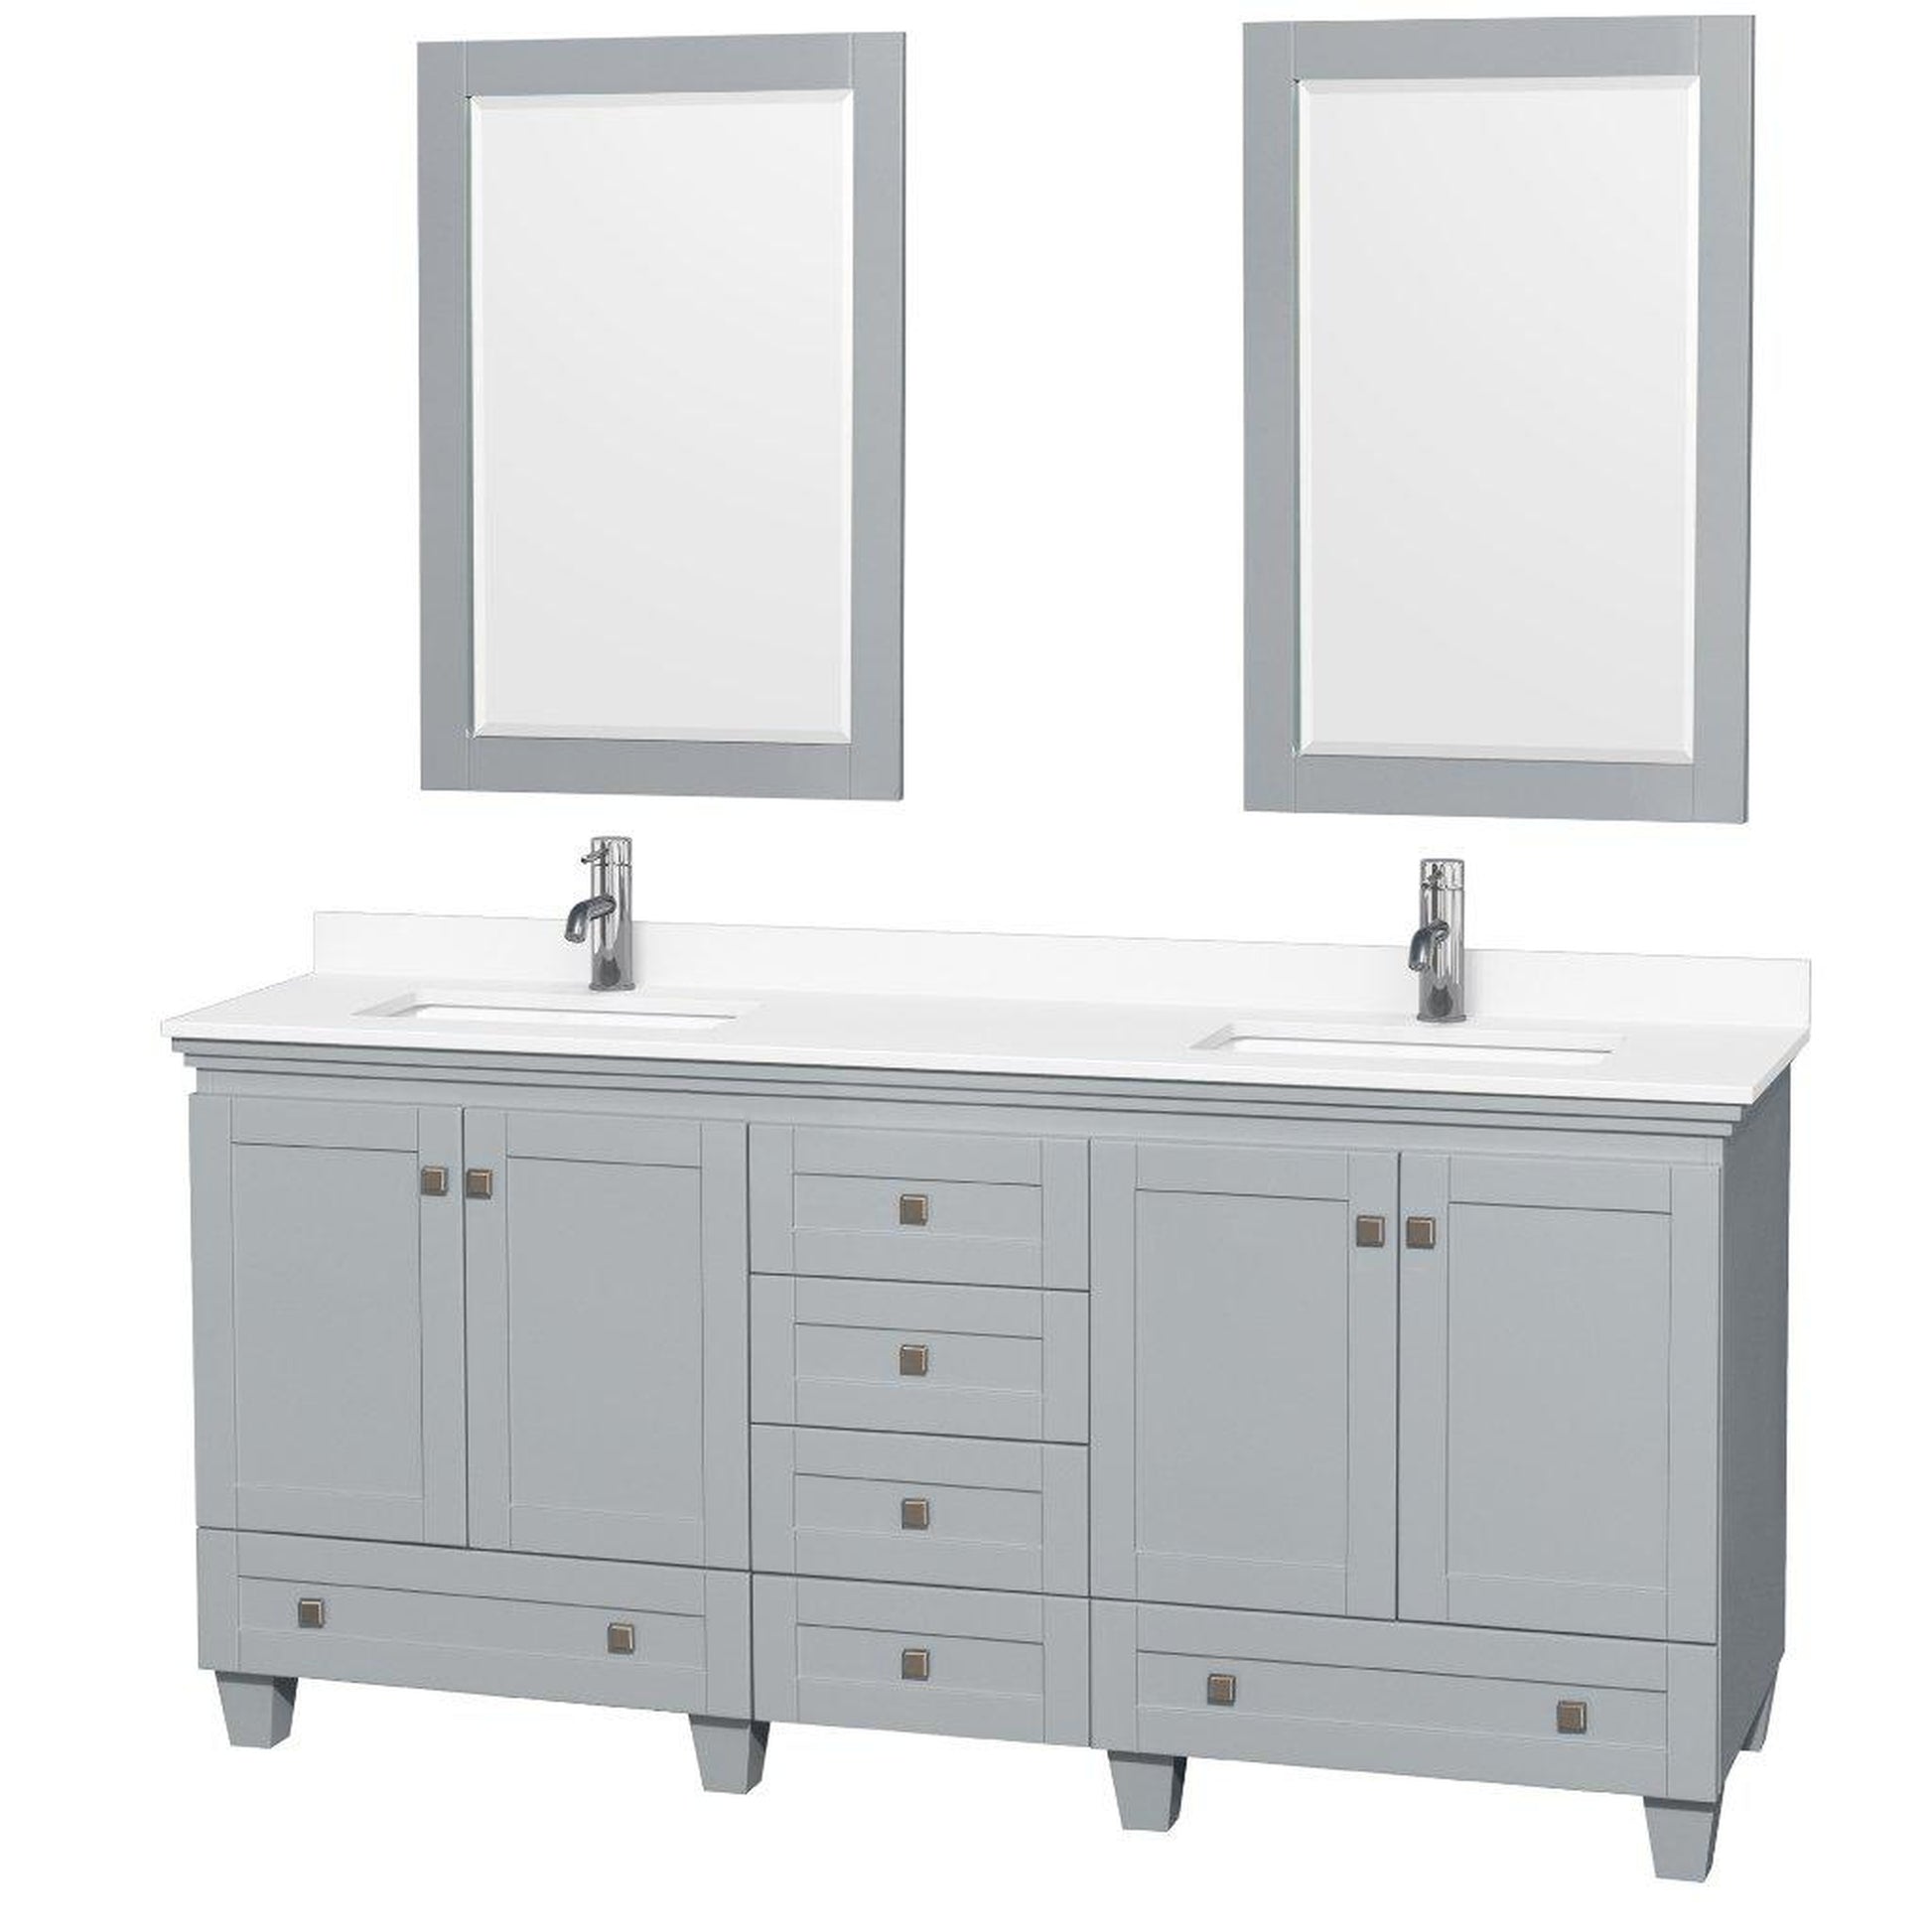 Wyndham Collection Acclaim 72" Double Bathroom Oyster Gray Vanity With White Cultured Marble Countertop And Undermount Square Sinks And 2 Set Of 24" Mirror